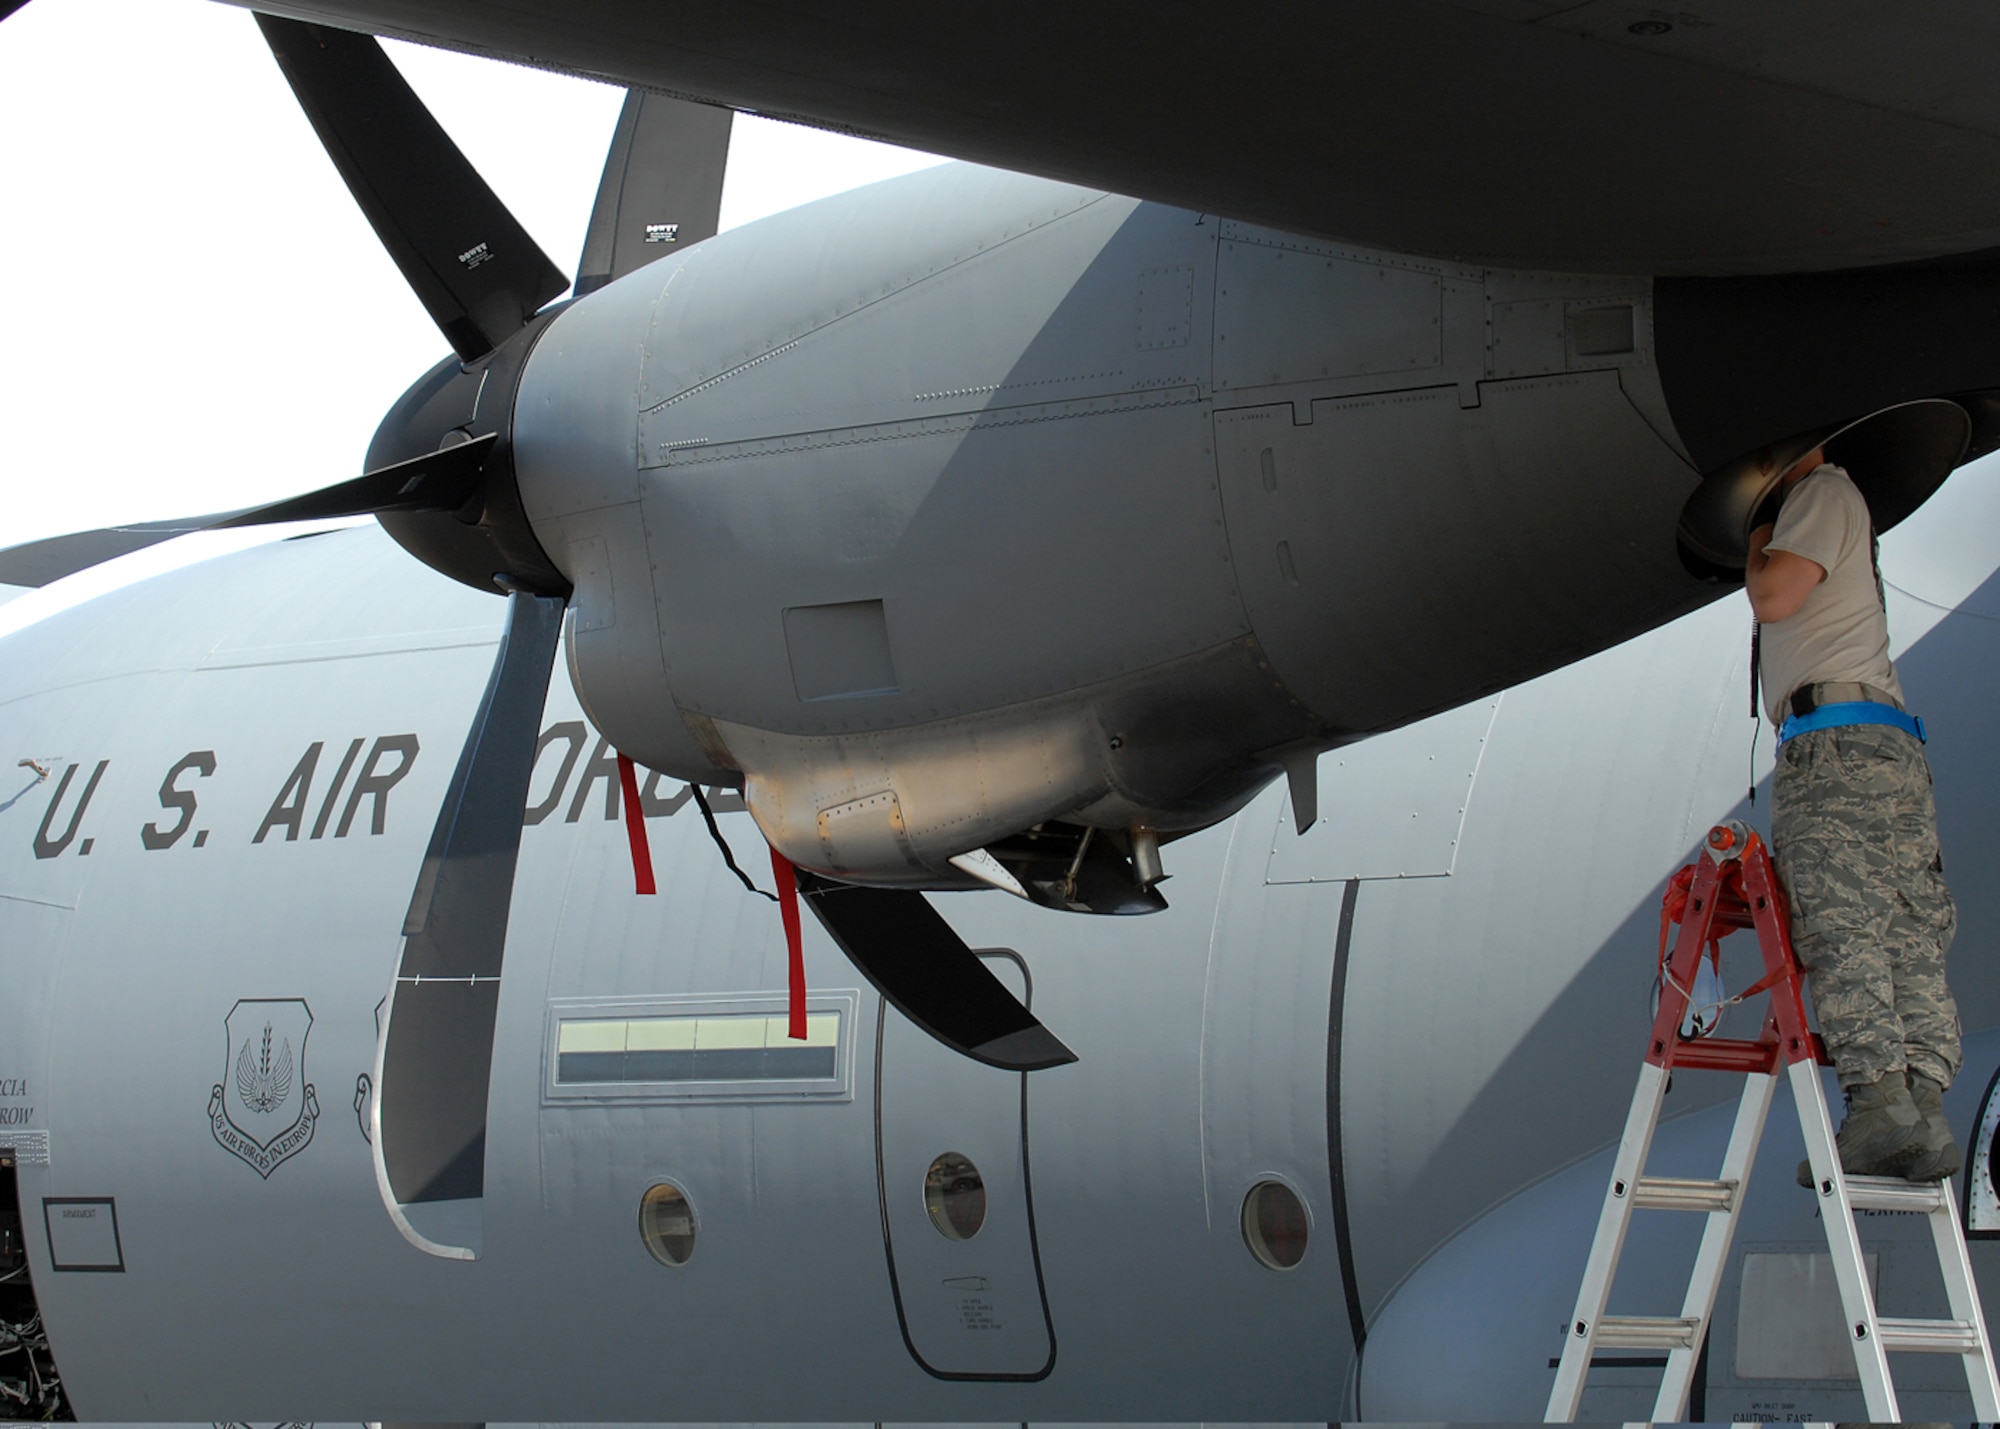 Tech. Sgt. Craig Arbugast, from the 86th Air Wing, Ramstein Air Base, Germany, performs an intake and exhaust inspection on a C-130 Hercules aircraft at McChord Air Force Base, Wash., July 18, 2009, before the beginning of Air Mobility Command Rodeo 2009. More than 50 Airmen from Team Ramstein were part of the 2,500 servicemembers from around the Air Force and the globe participating in the rodeo. The competition, which went from Jul 19 to 24, is a bi-annual mobility readiness exercises that brings teams together to compete in more than 50 judged events spanning the categories of aerial port, aeromedical evacuation, aircrew, fit to fight, maintenance and security forces.   (U.S. Air Force photo by Staff Sgt. Stephen Schester) 